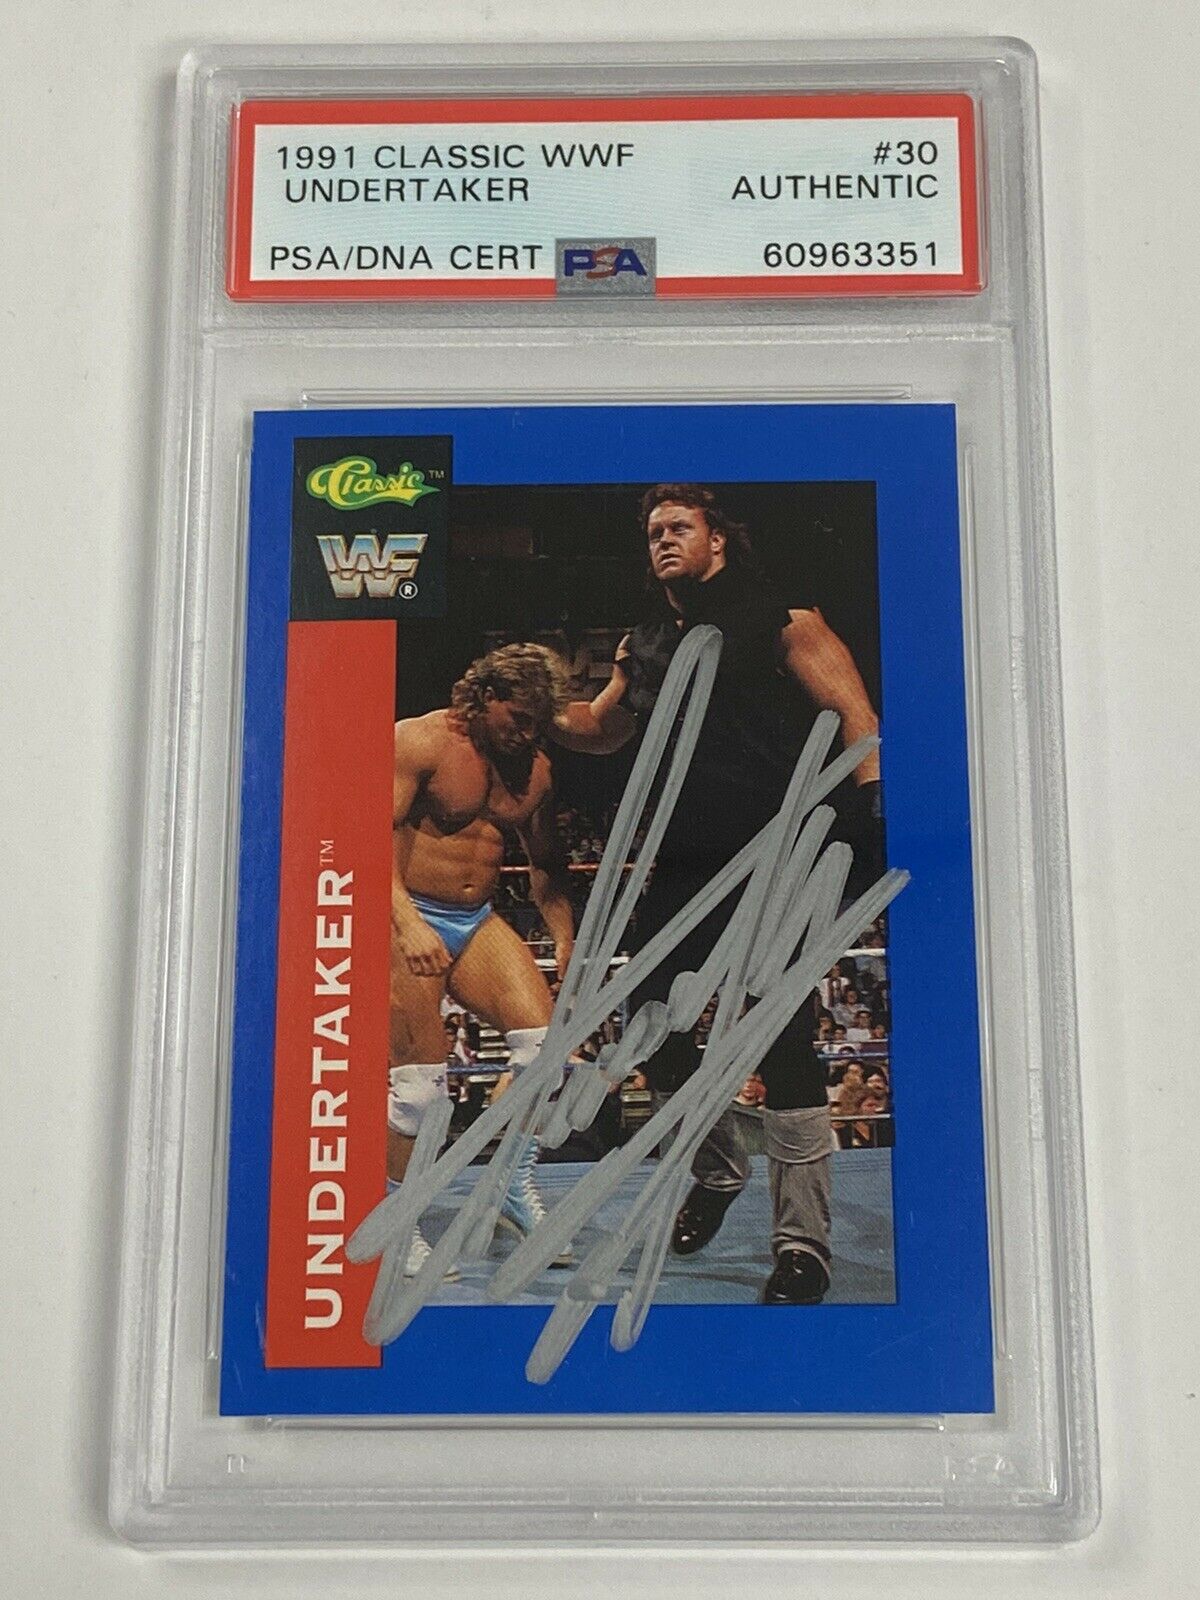 1991 WWF trading card autographed by The Undertaker